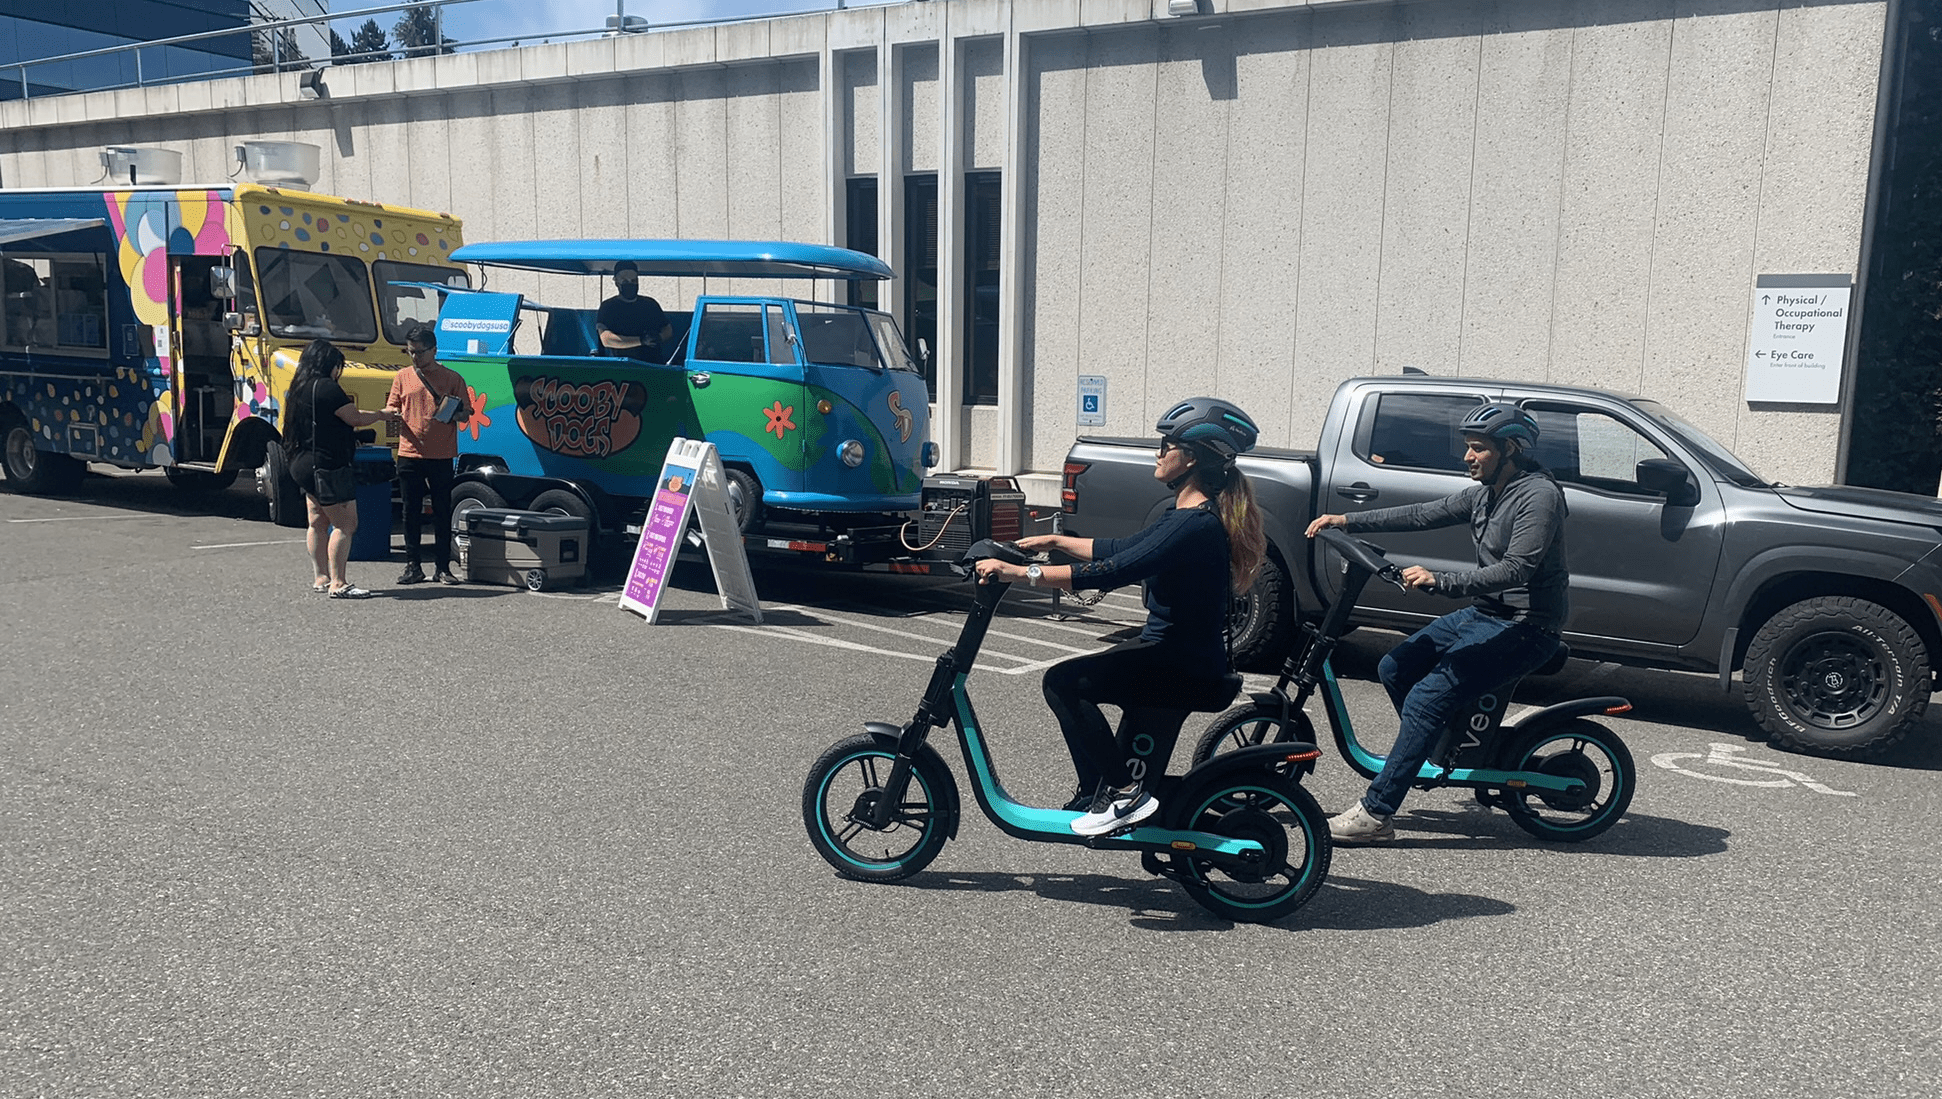 People try out riding bike share equipment at a public demonstration and training event. A blue van and large building are in the background, with paved parking areas in the foreground.